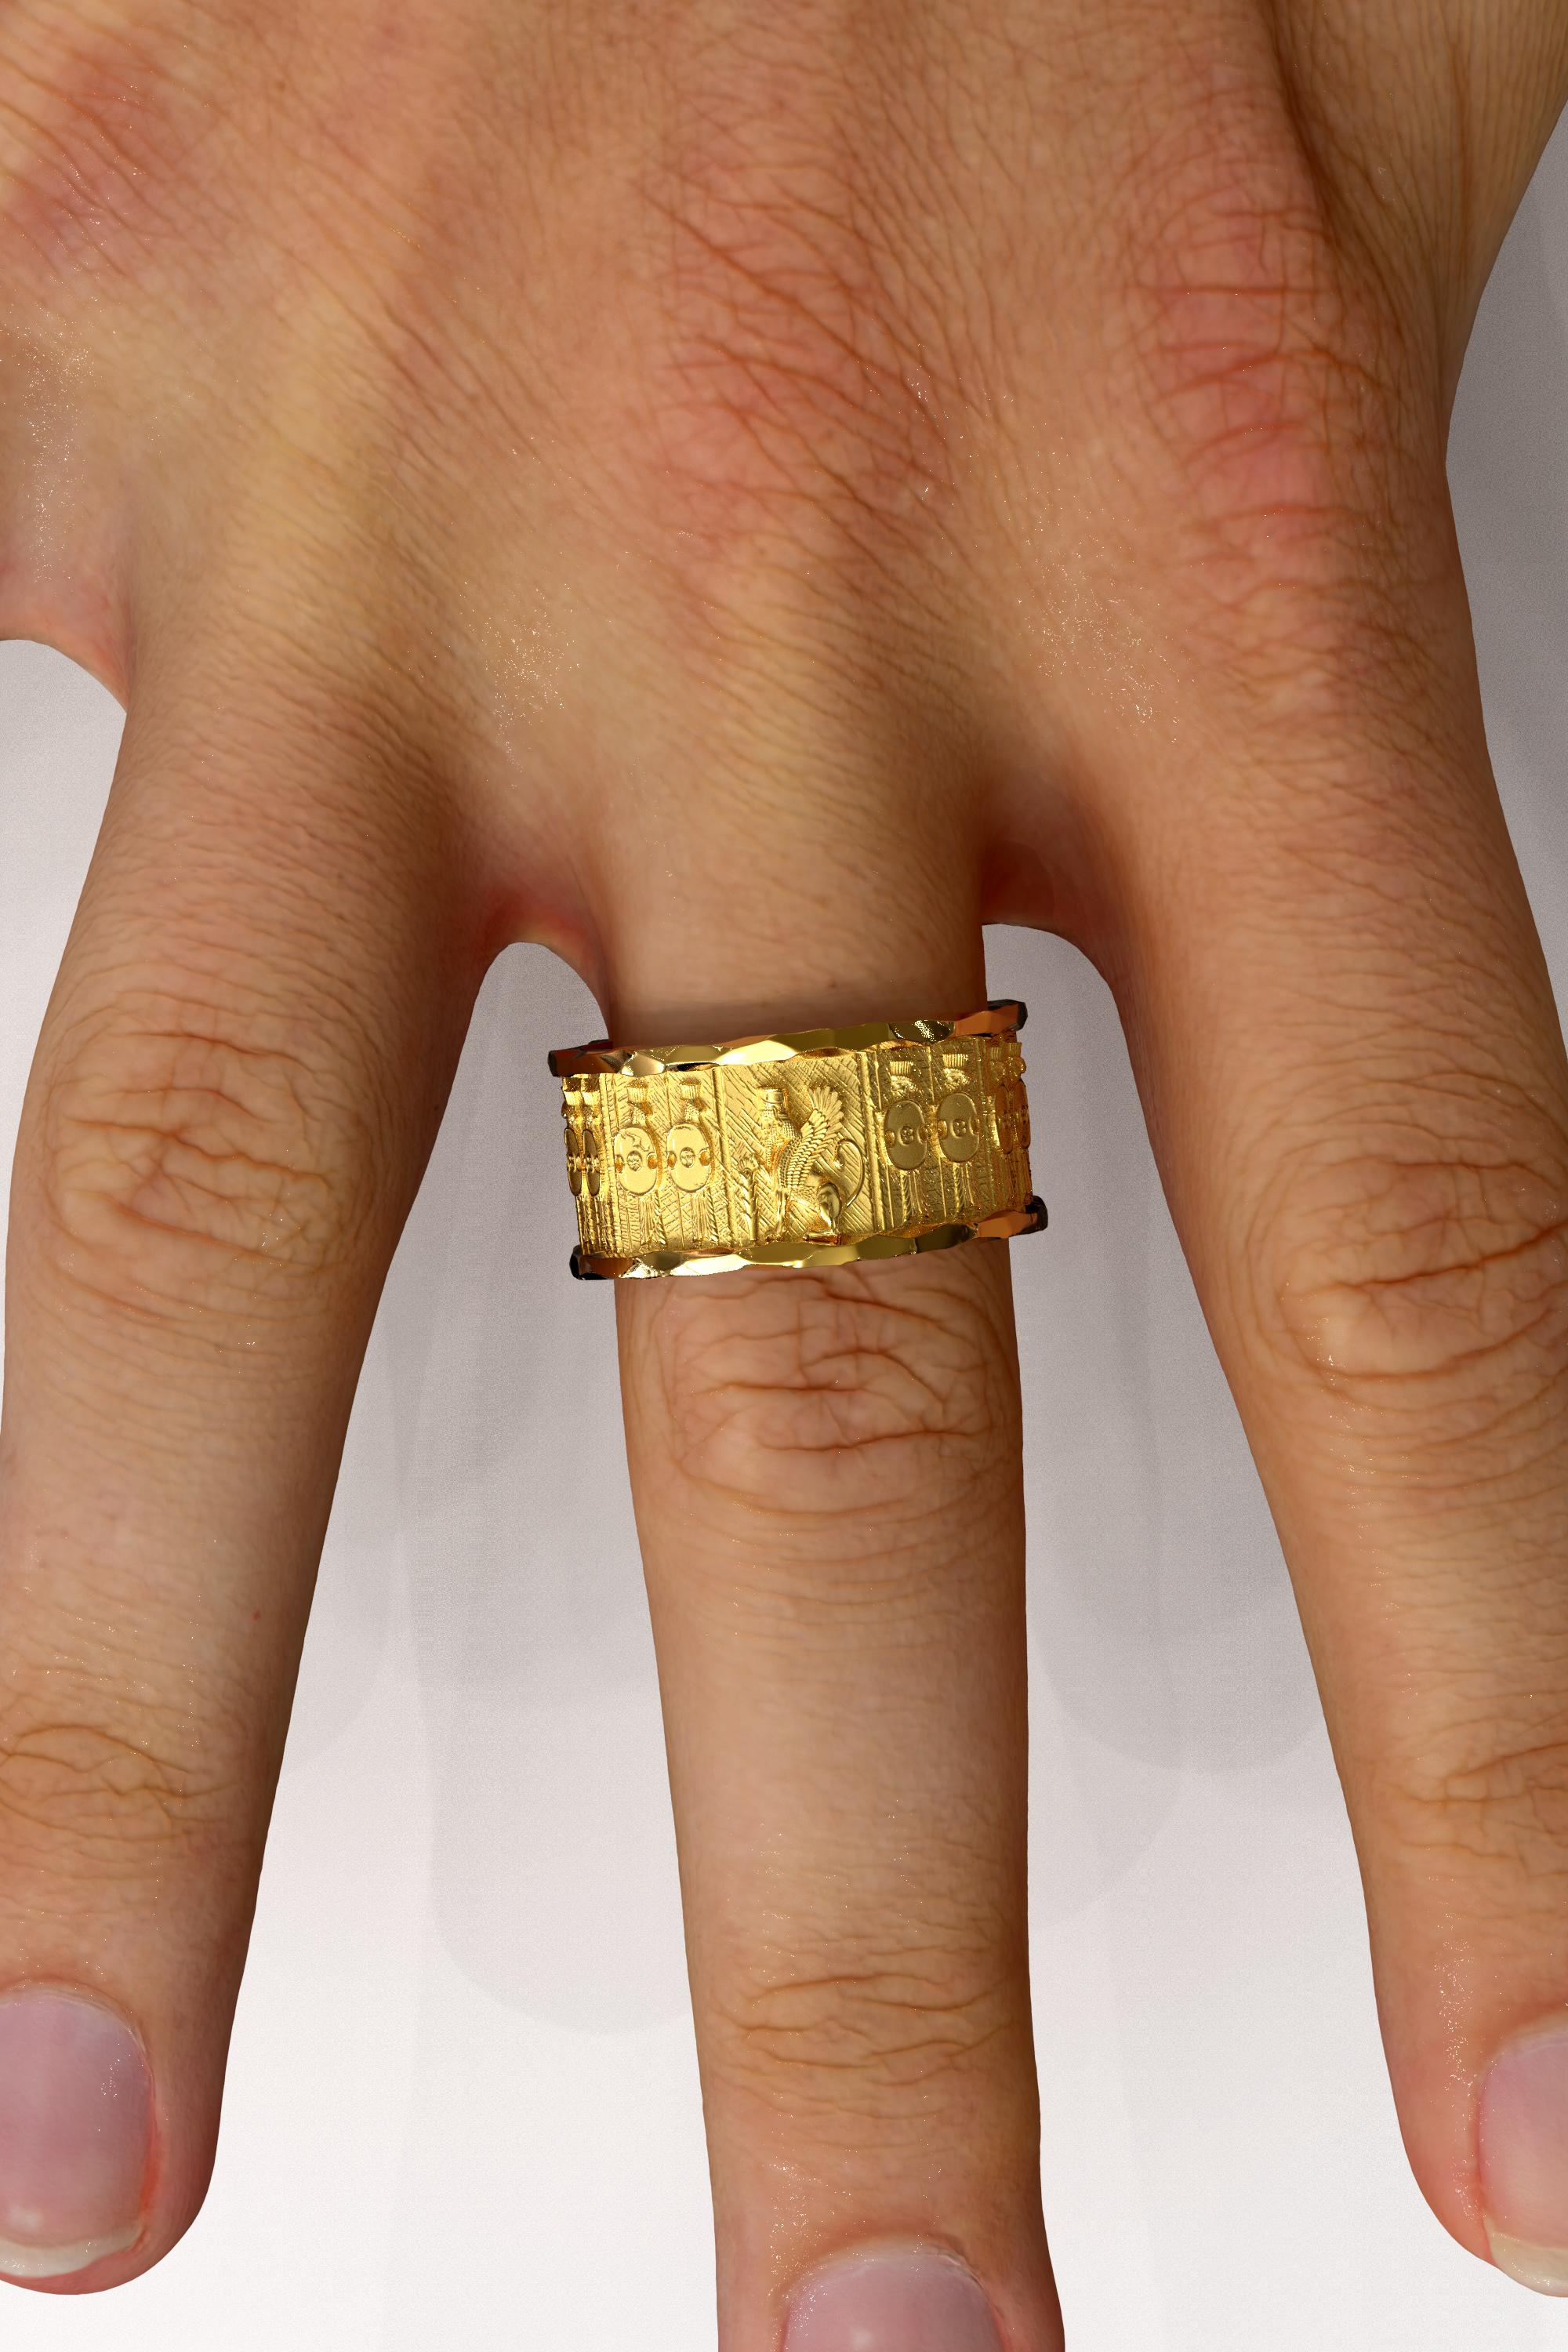 For Sale:  Italian 14k Gold Ring with Temple of Persepolis Bas-Reliefs, Persian Style Ring  4